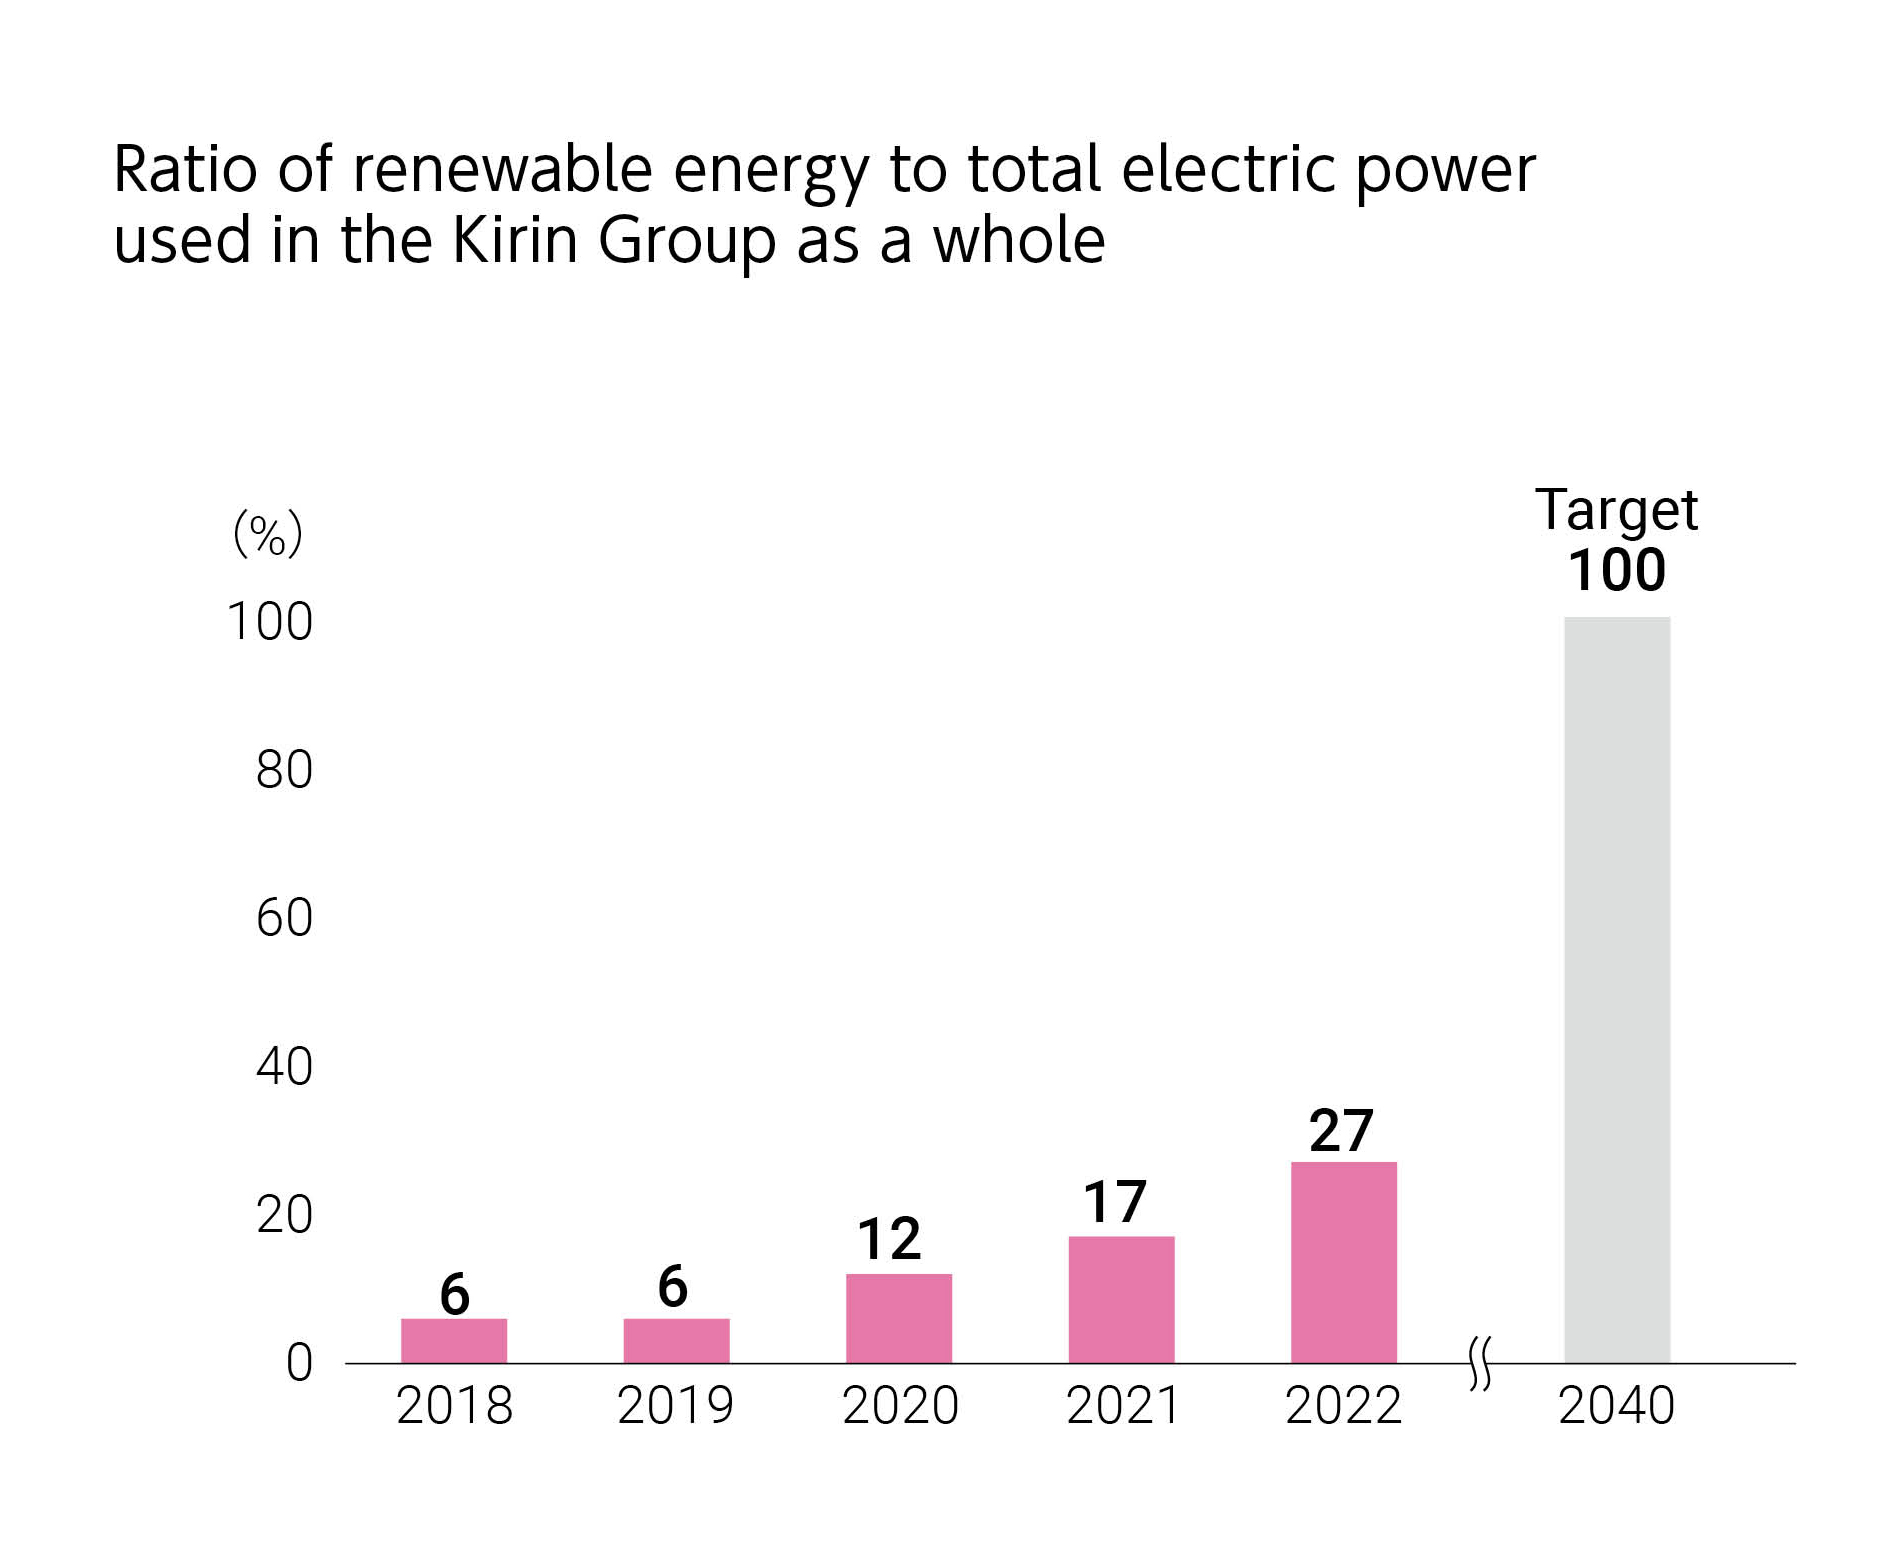 Ratio of renewable energy to total electric power used in the Kirin Group as a whole